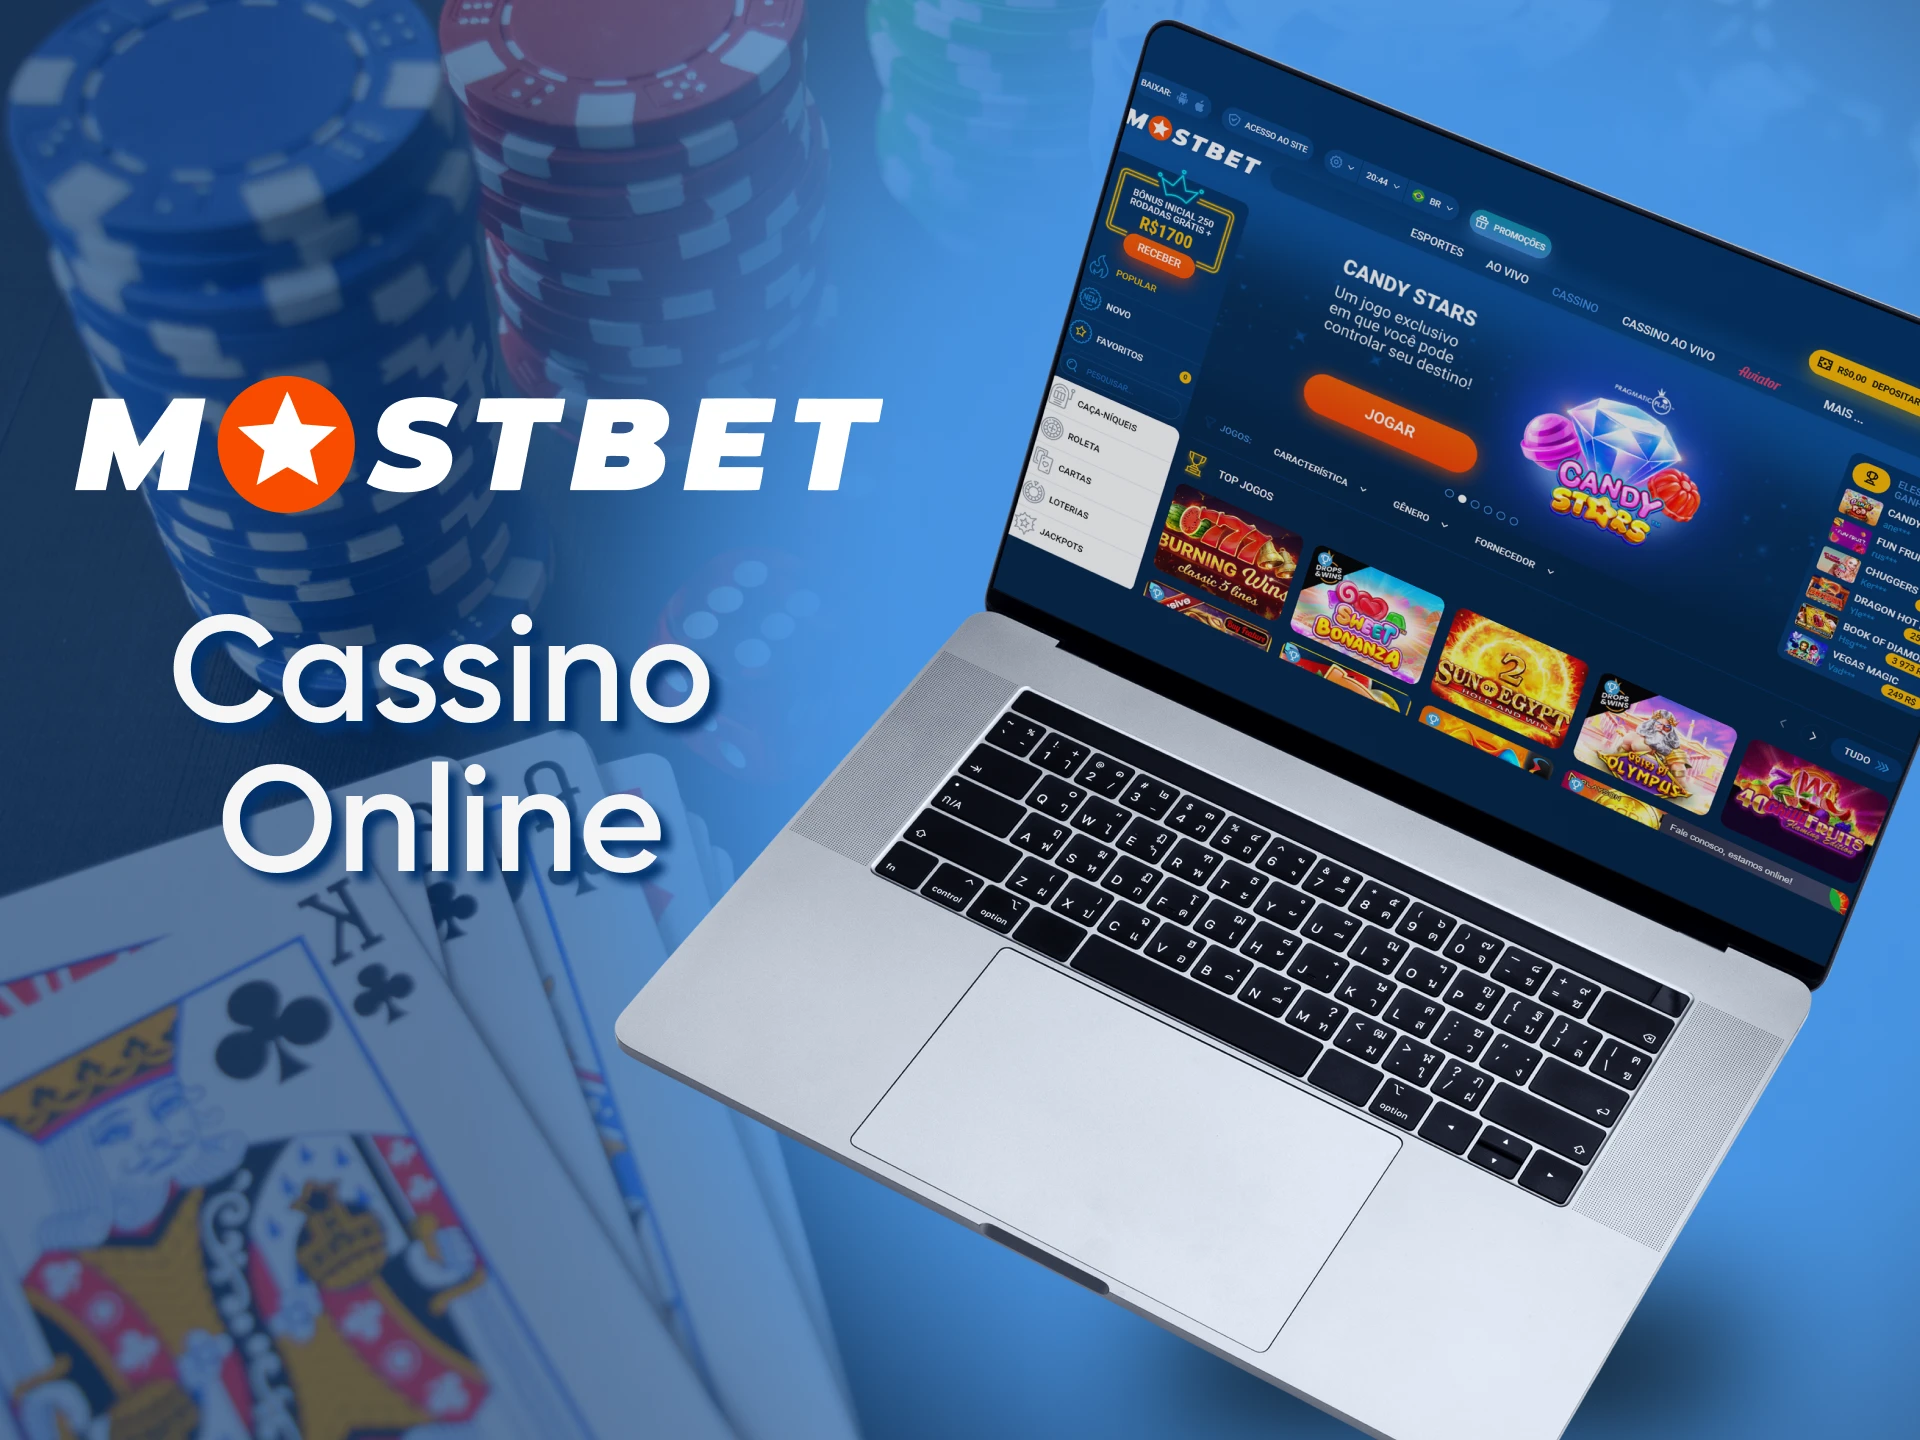 Place bets at Mostbet on various casino games.